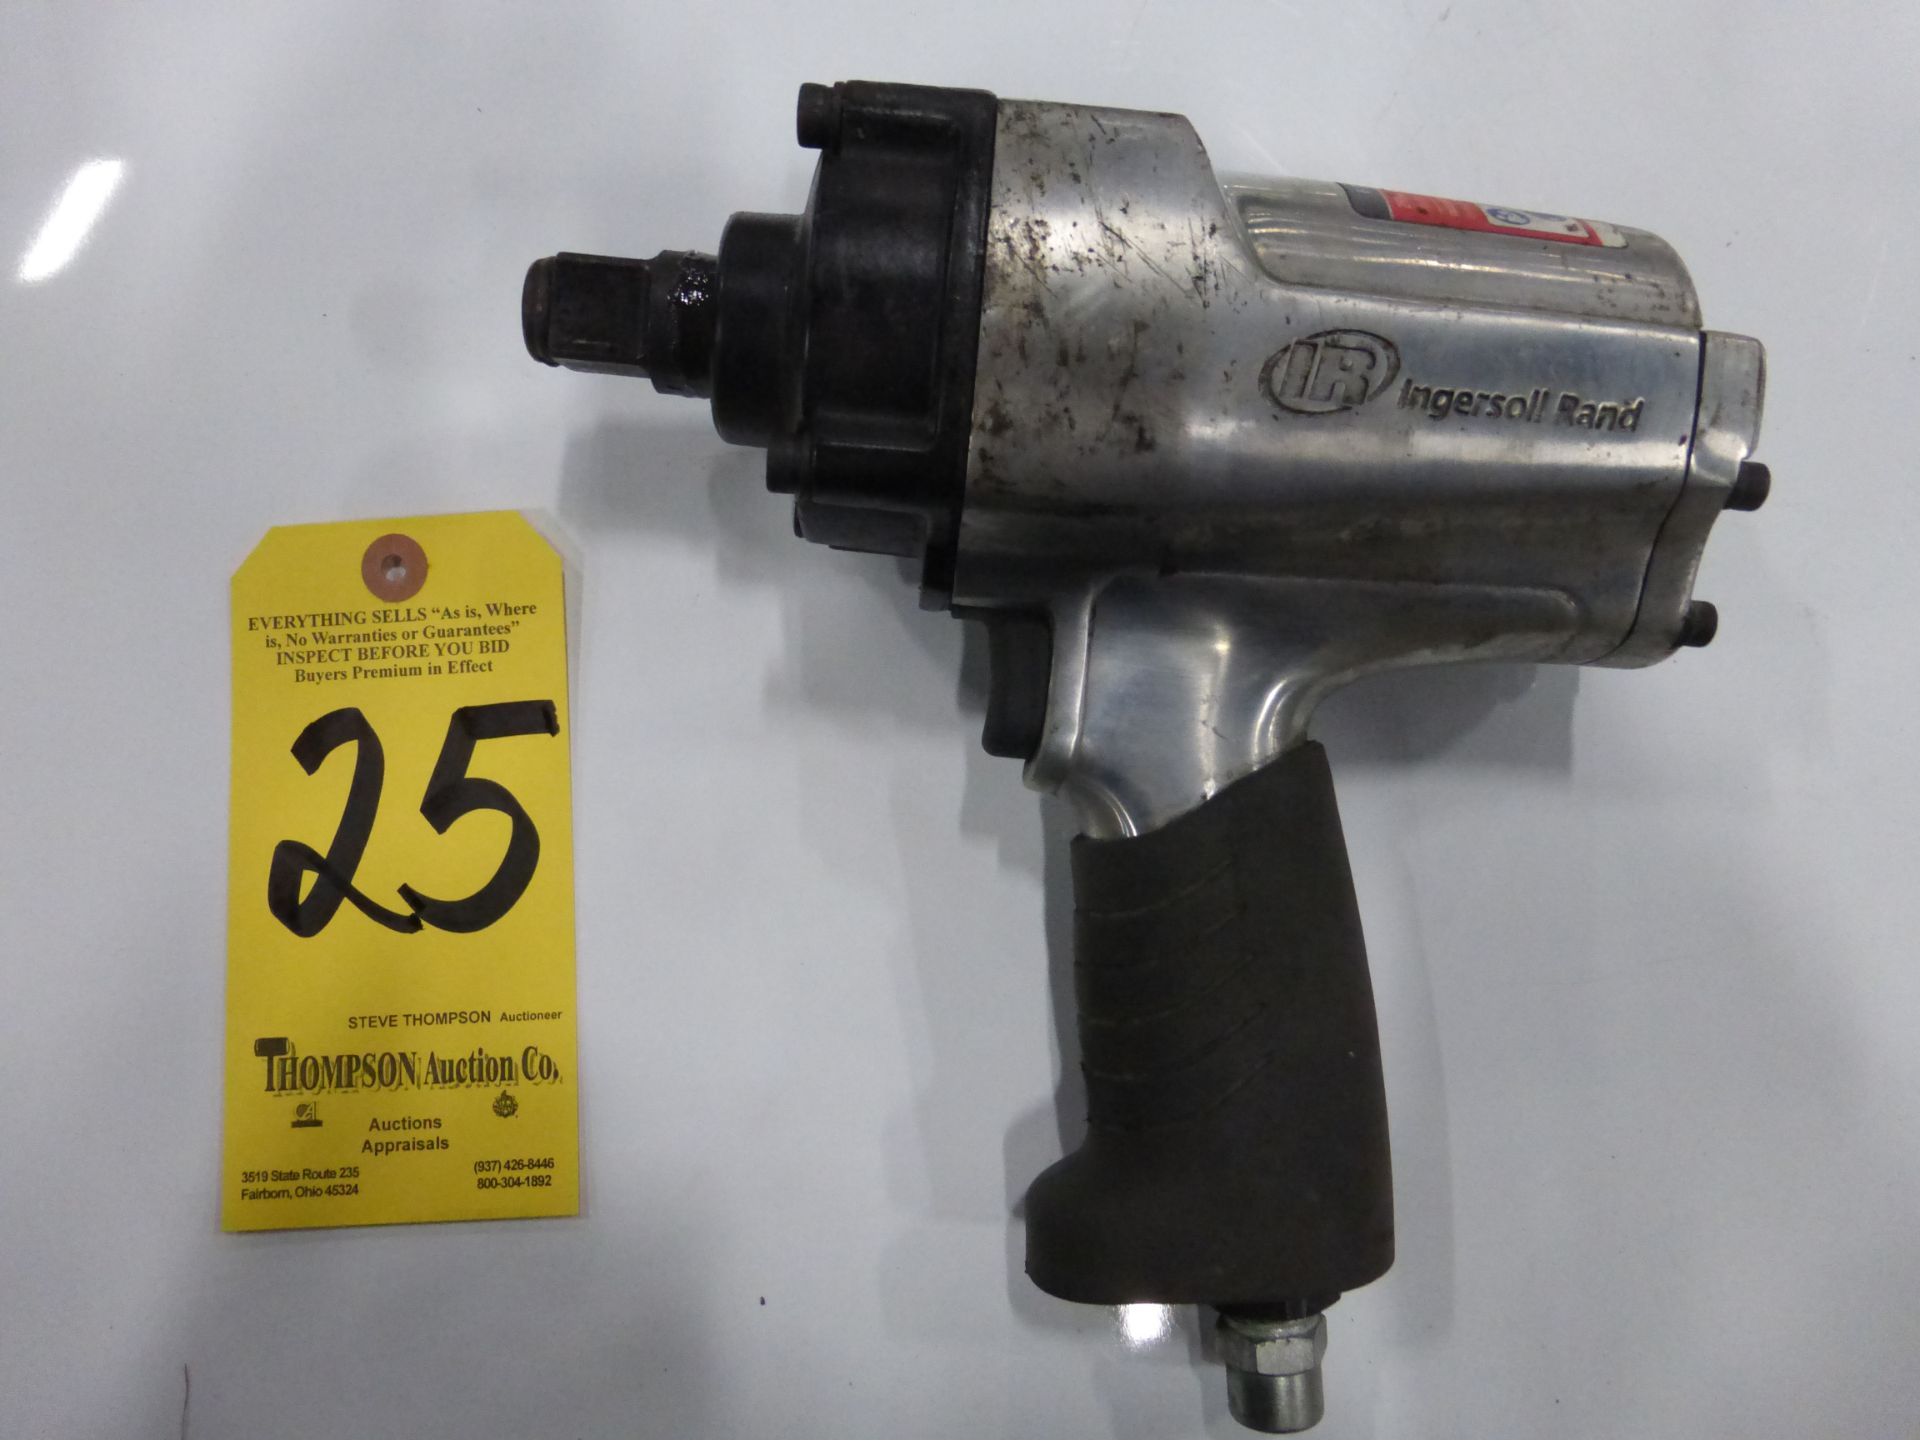 Ingersoll Rand Pneumatic Impact, 3/4 in Drive